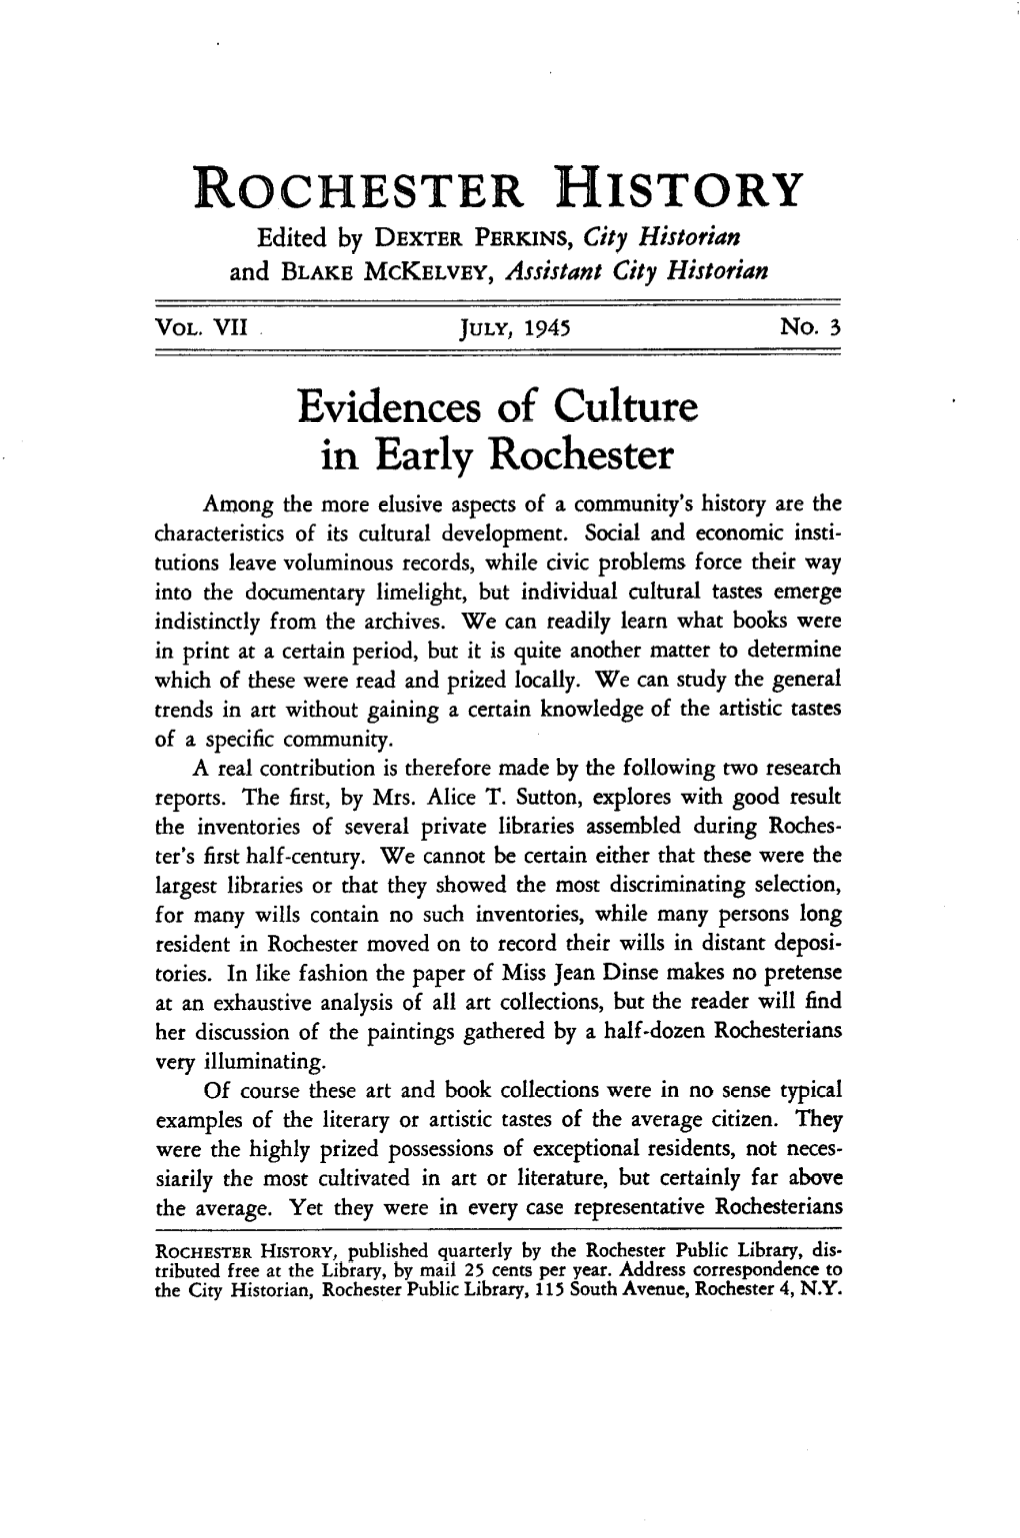 OCHESTER HISTORY Evidences of Culture in Early Rochester